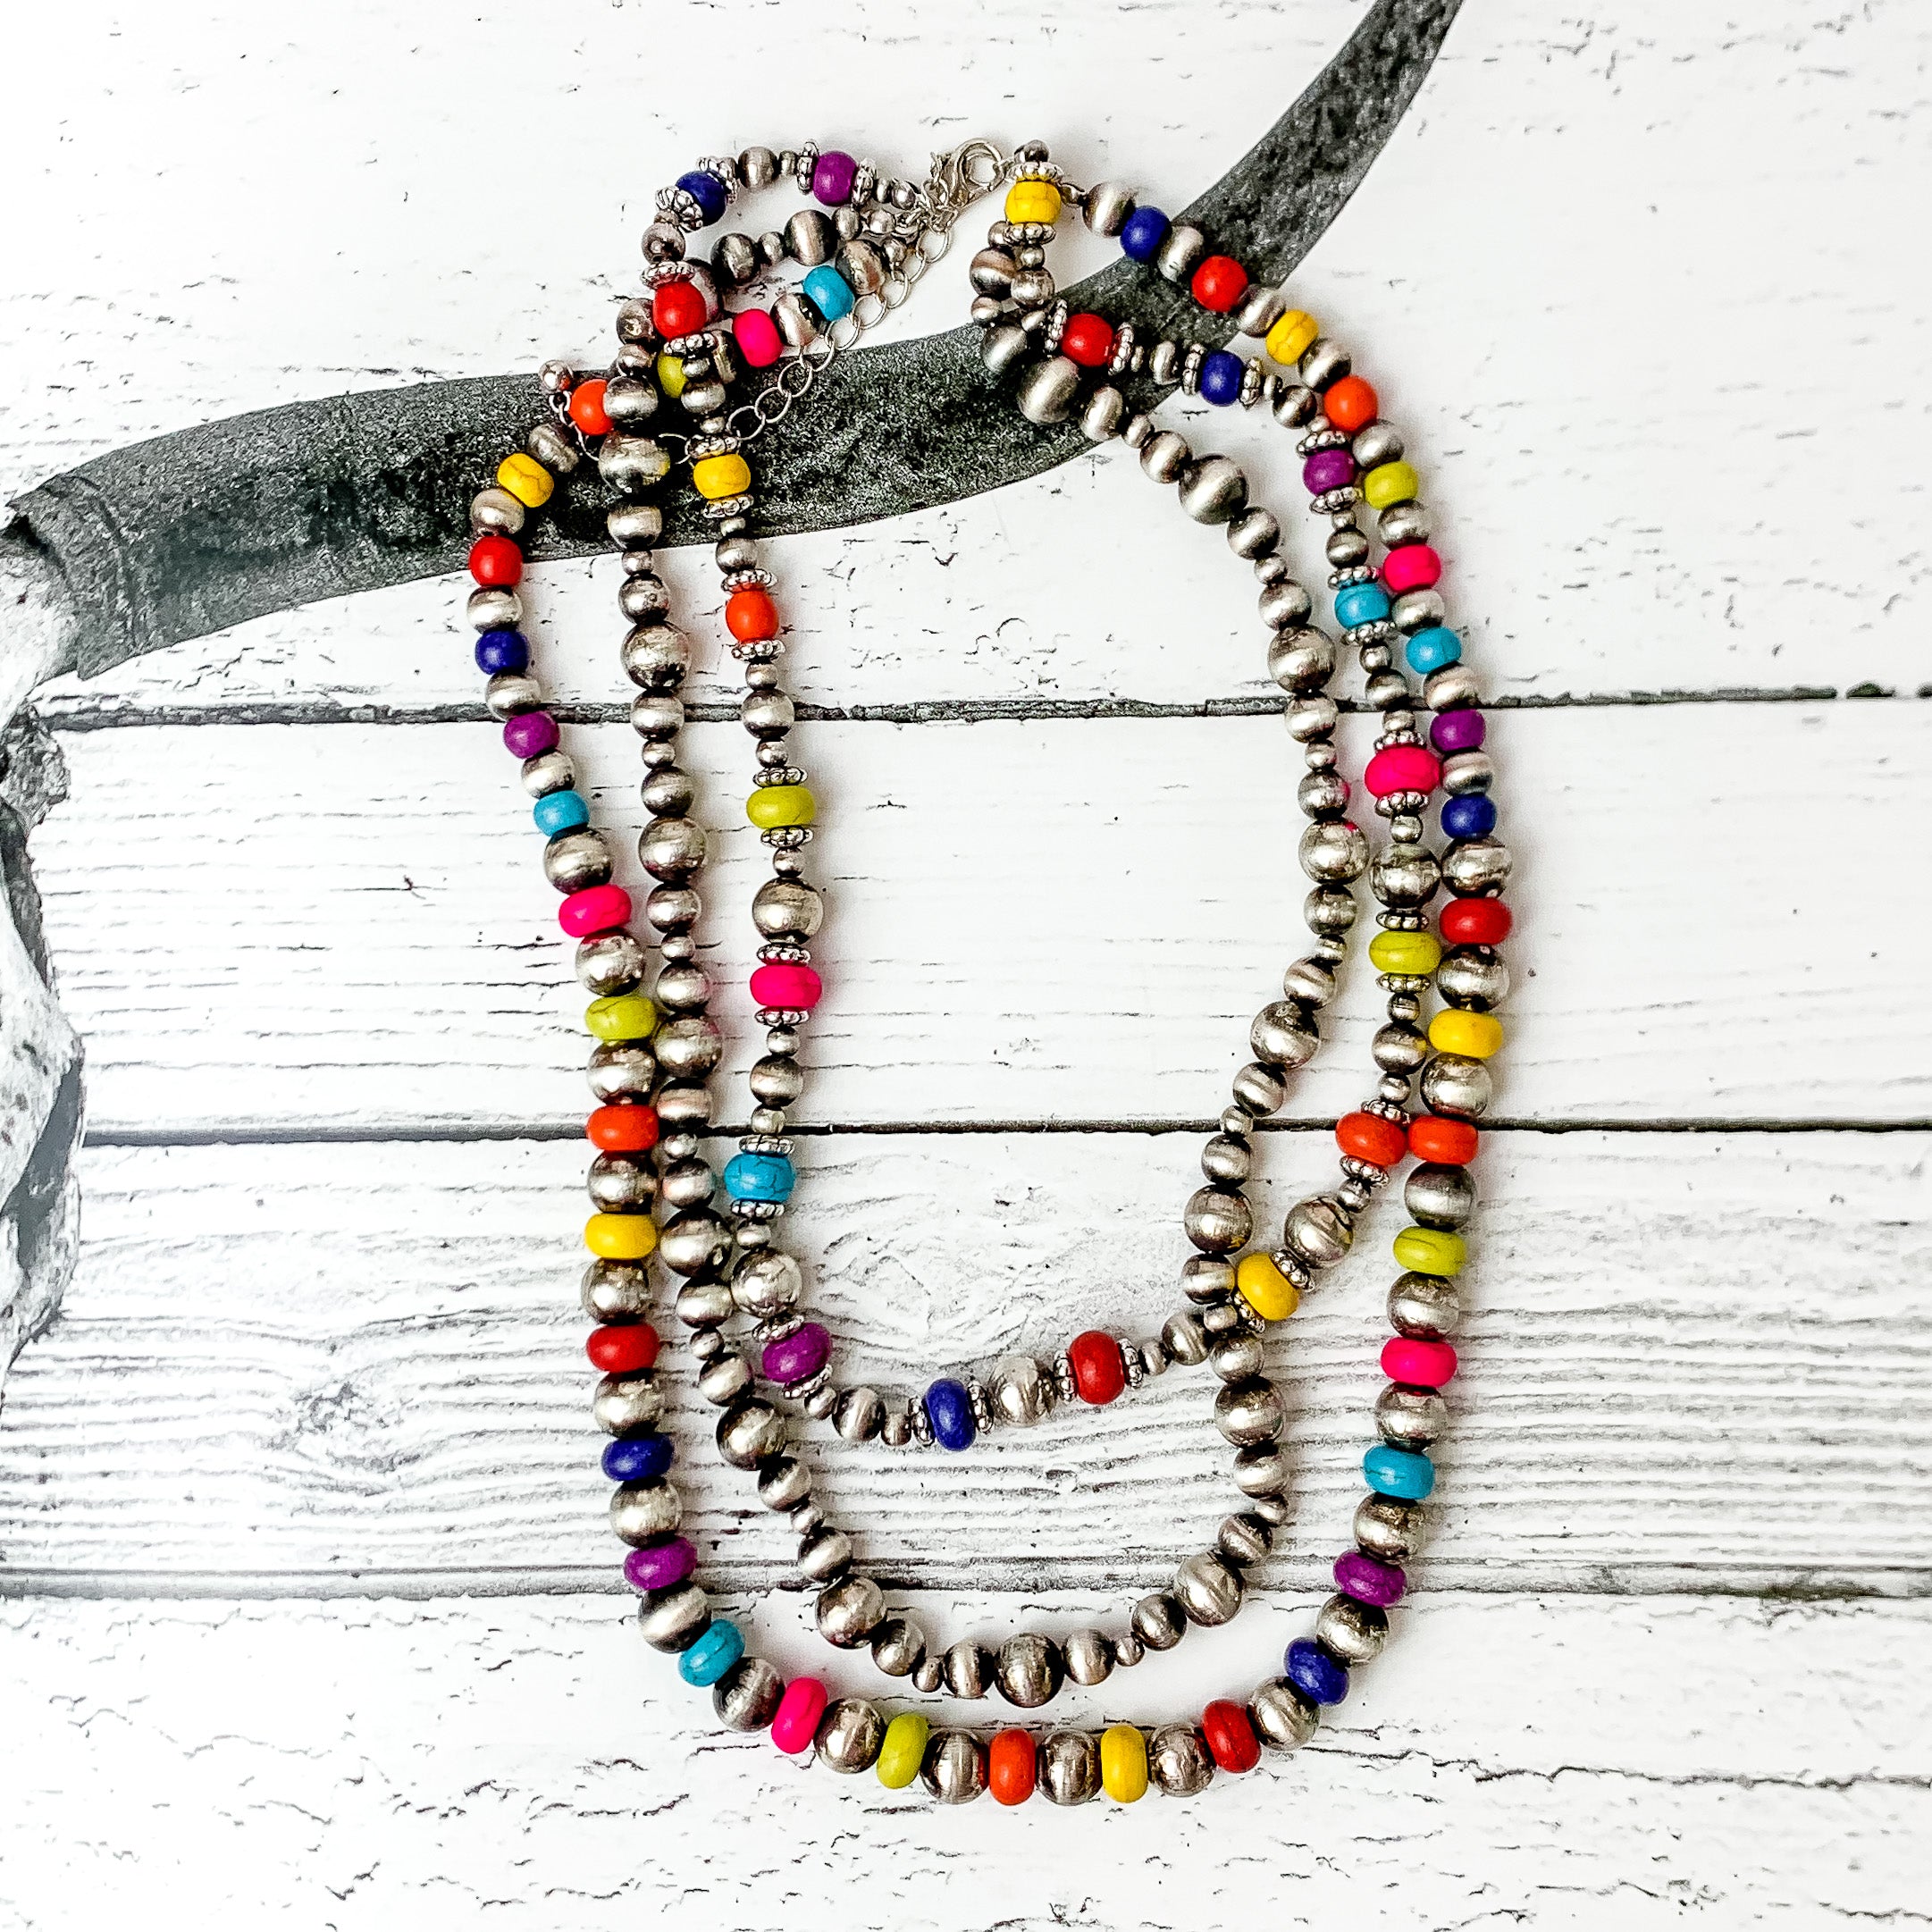 This necklace comes with three strands of beads. Two of them are mixed with multi colored beads and faux navajo pearls in silver. The other strand is just faux navajo pearls in silver. Pictured on a black and white western photo in the background.